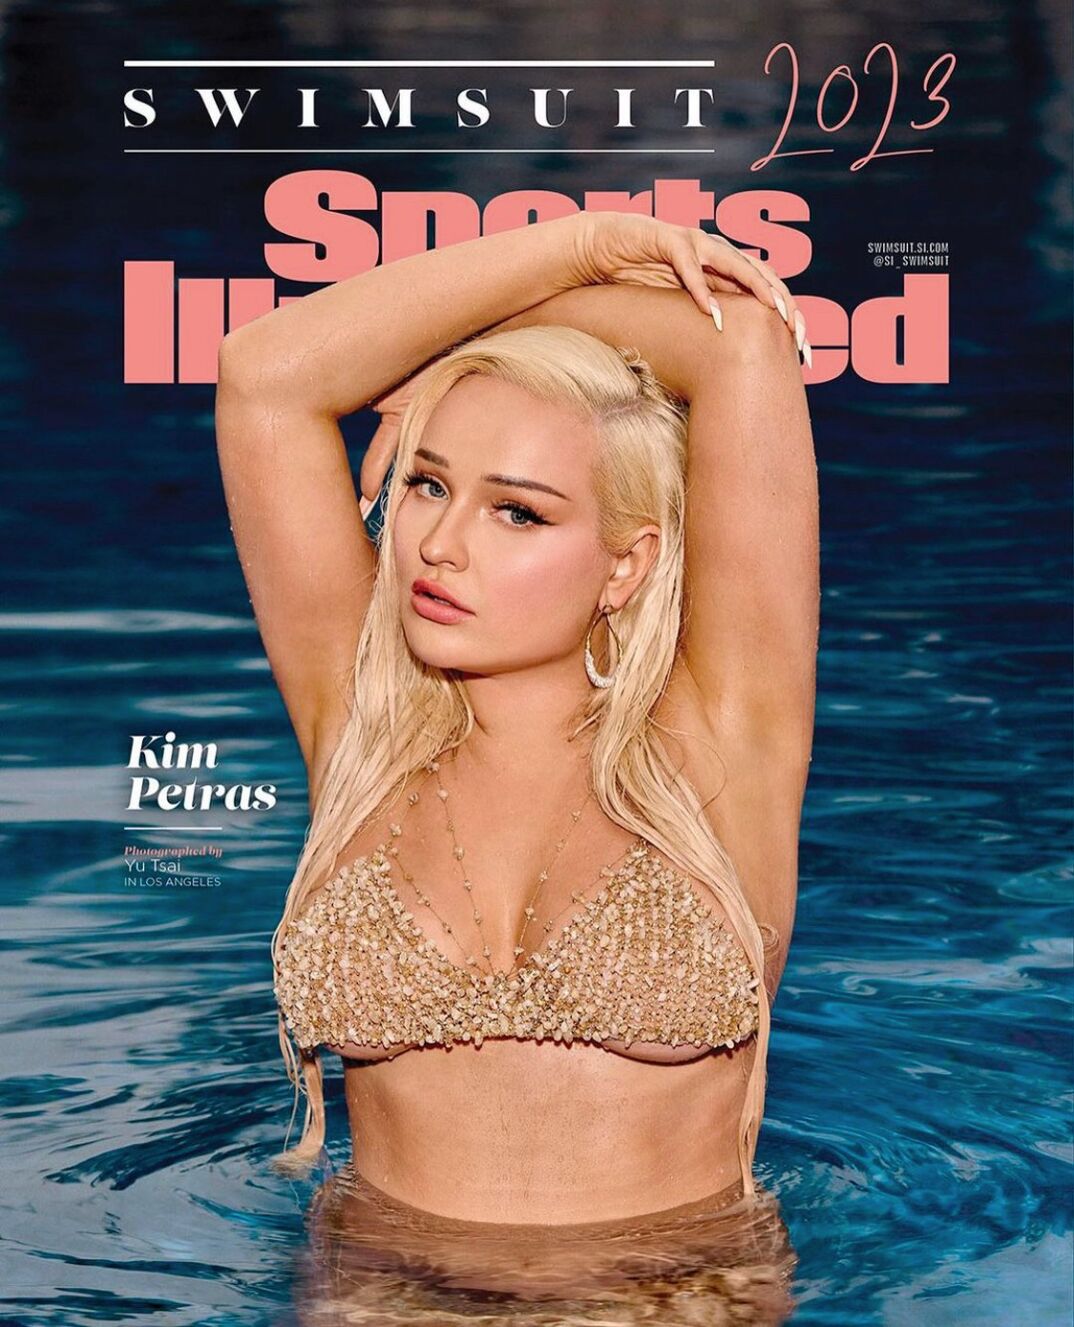 Kim Petras on the cover of Sports Illustrated